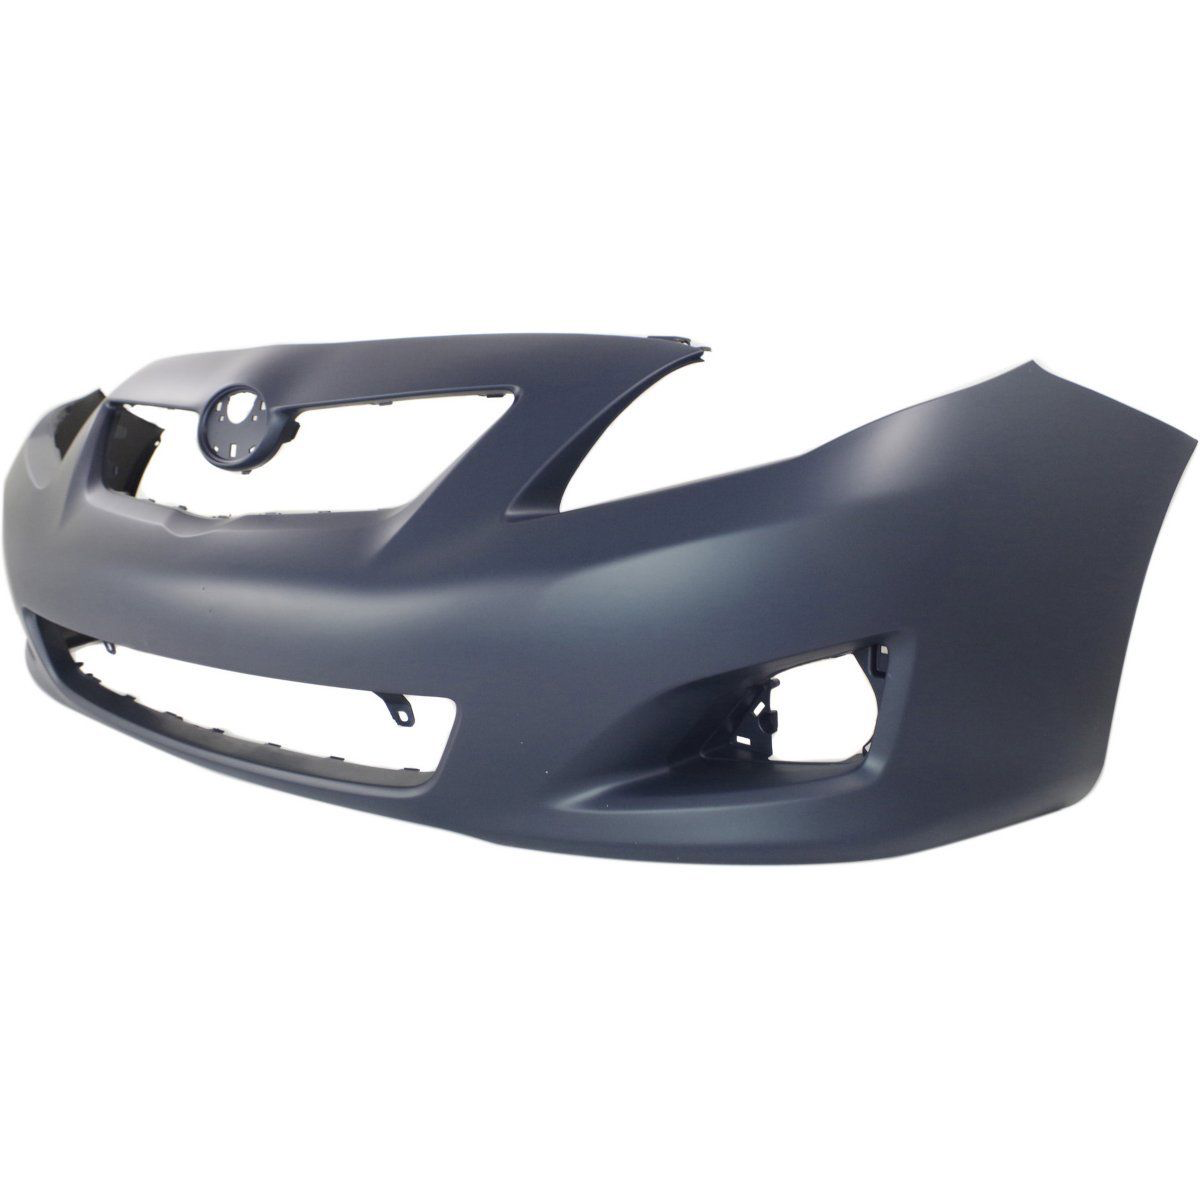 2009-2010 TOYOTA COROLLA Front Bumper Cover BASE|CE|LE|XLE  w/o Spoiler Holes Painted to Match